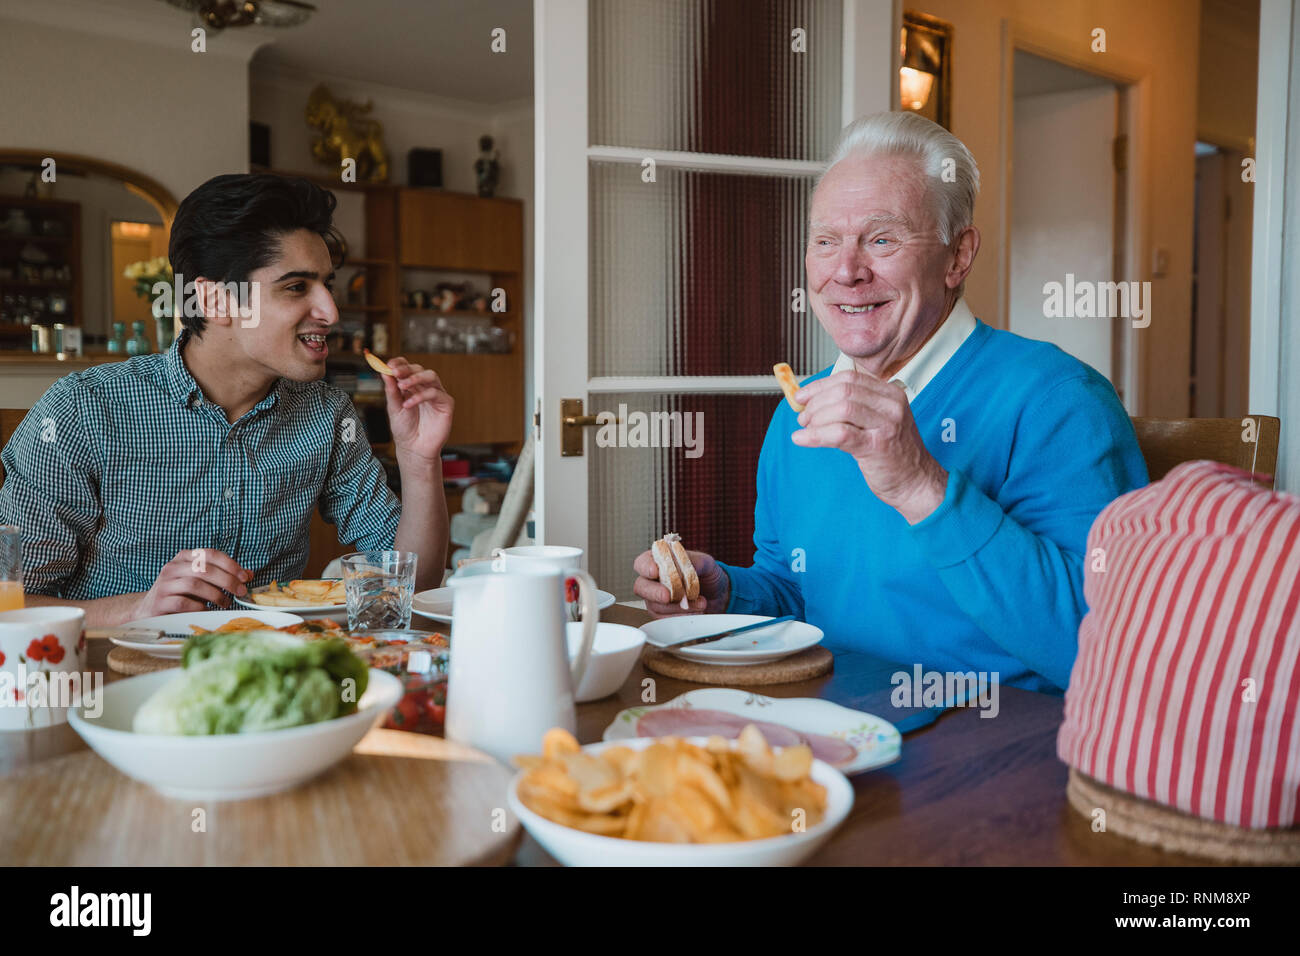 Senior man is having lunch at home with his grandson. They are eating sandwiches and potato chips. Stock Photo